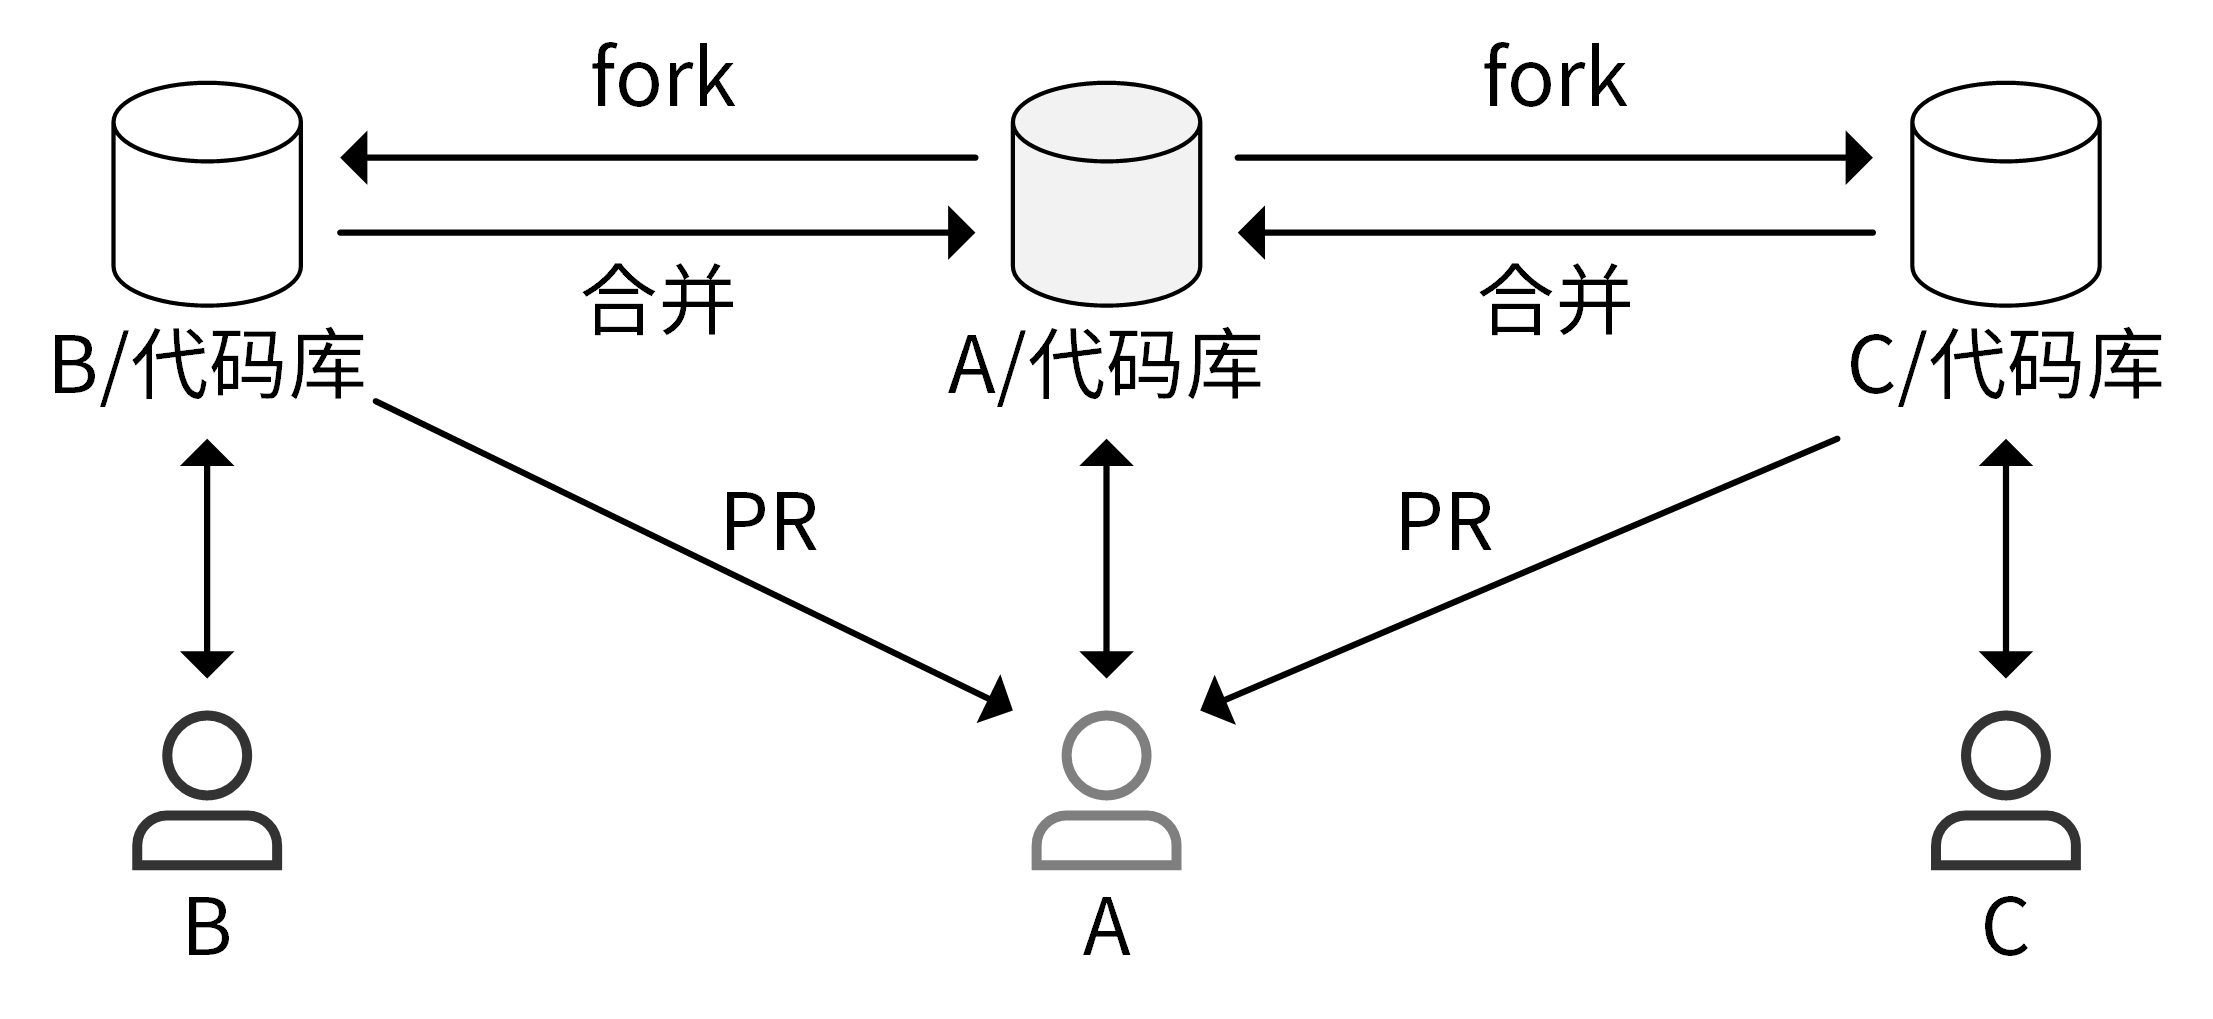 https://img.zhaoweiguo.com/knowledge/images/soft-engineerings/standard-flow4-forking.webp